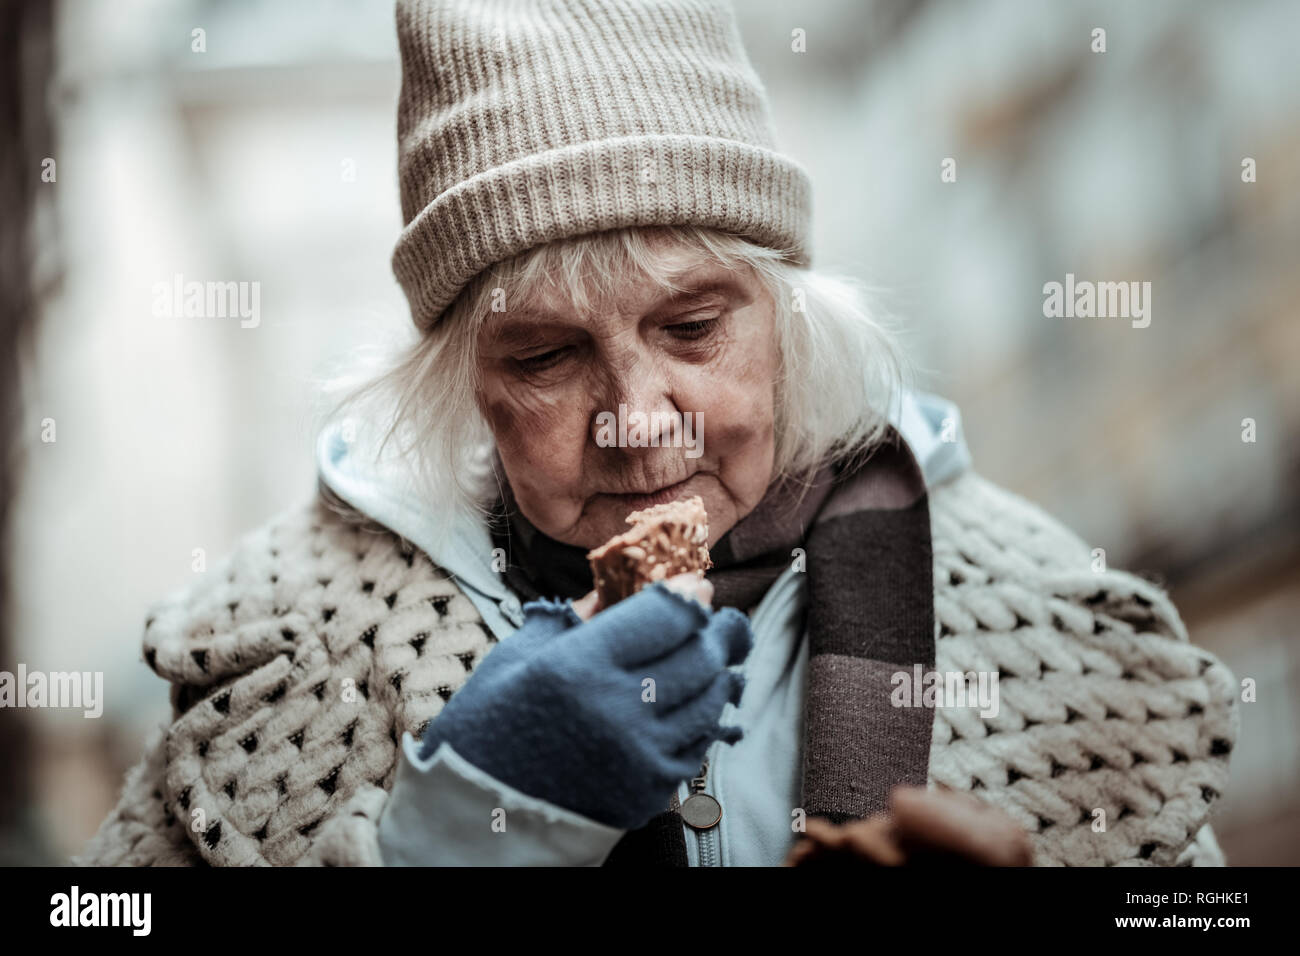 Nice aged woman looking at the bread Stock Photo